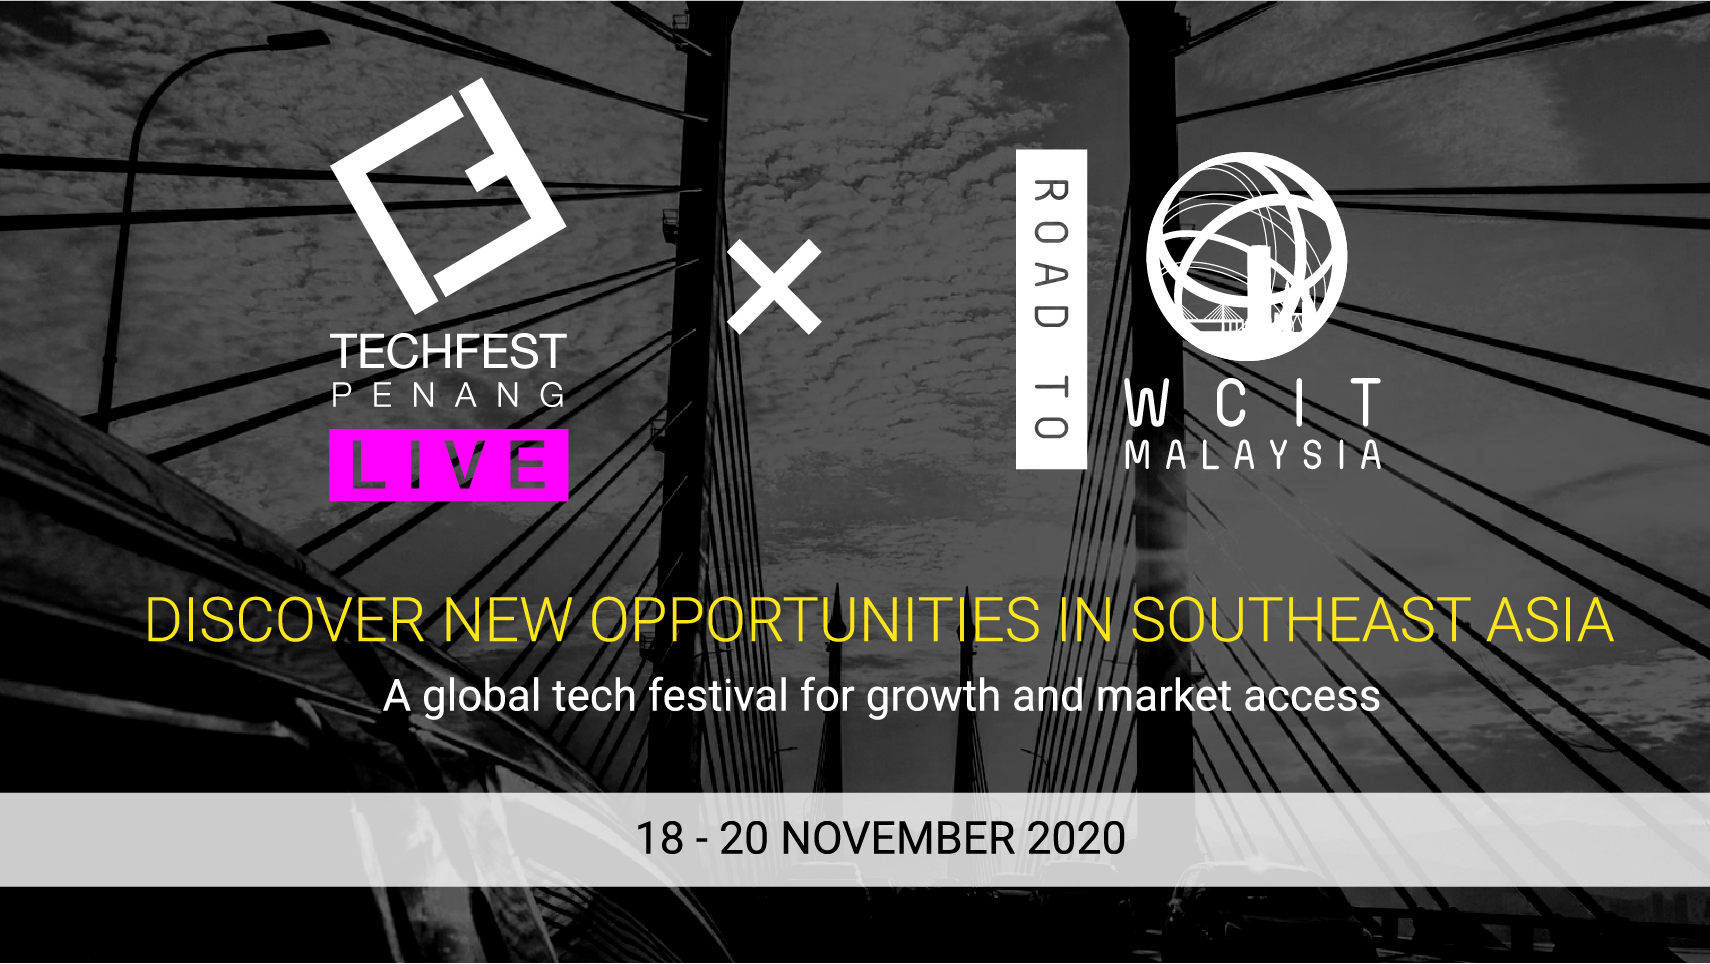 Techfest2020 Live features Road-to-WCIT Malaysia, Georgetown, Pulau Pinang, Malaysia